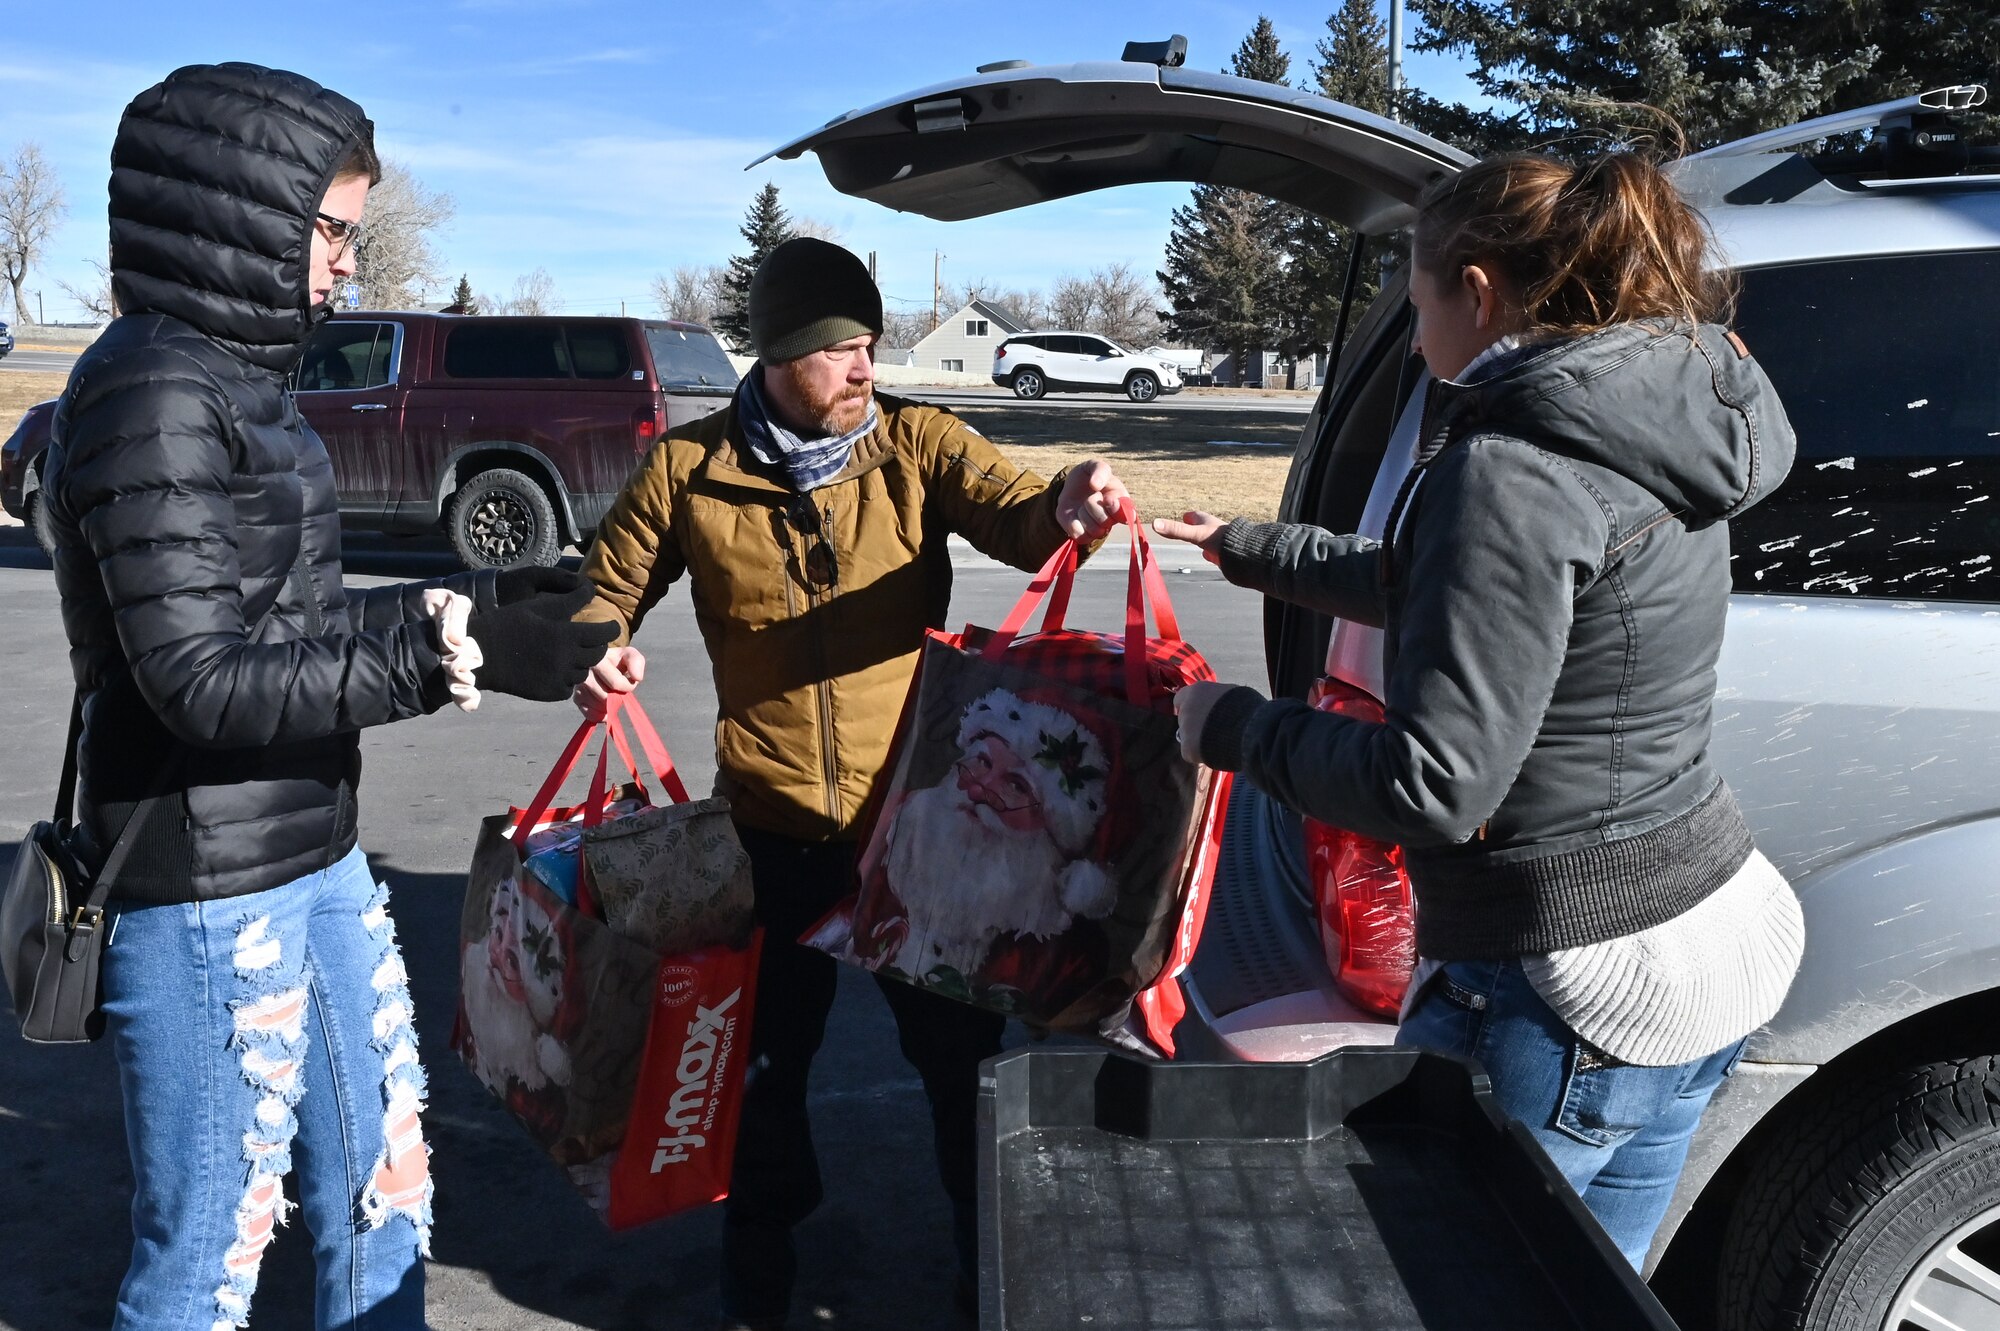 David Cook, 90th Contracting Squadron contracting specialist, hands presents to Sara Cook, 90 CONS agency/organization program coordinator, and Senior Airman Kyra Blystone, 90 CONS contracting officer, to drop them off for local families in need as part of Needs Inc Adopt a Family Program in Cheyenne, Wyoming, Dec 19, 2022. 90 CONS came together for the second year in a row to support two families in need, so they did not have to choose between giving their kids food or celebrating the holiday season. (U.S. Air Force photo by Joseph Coslett Jr.)